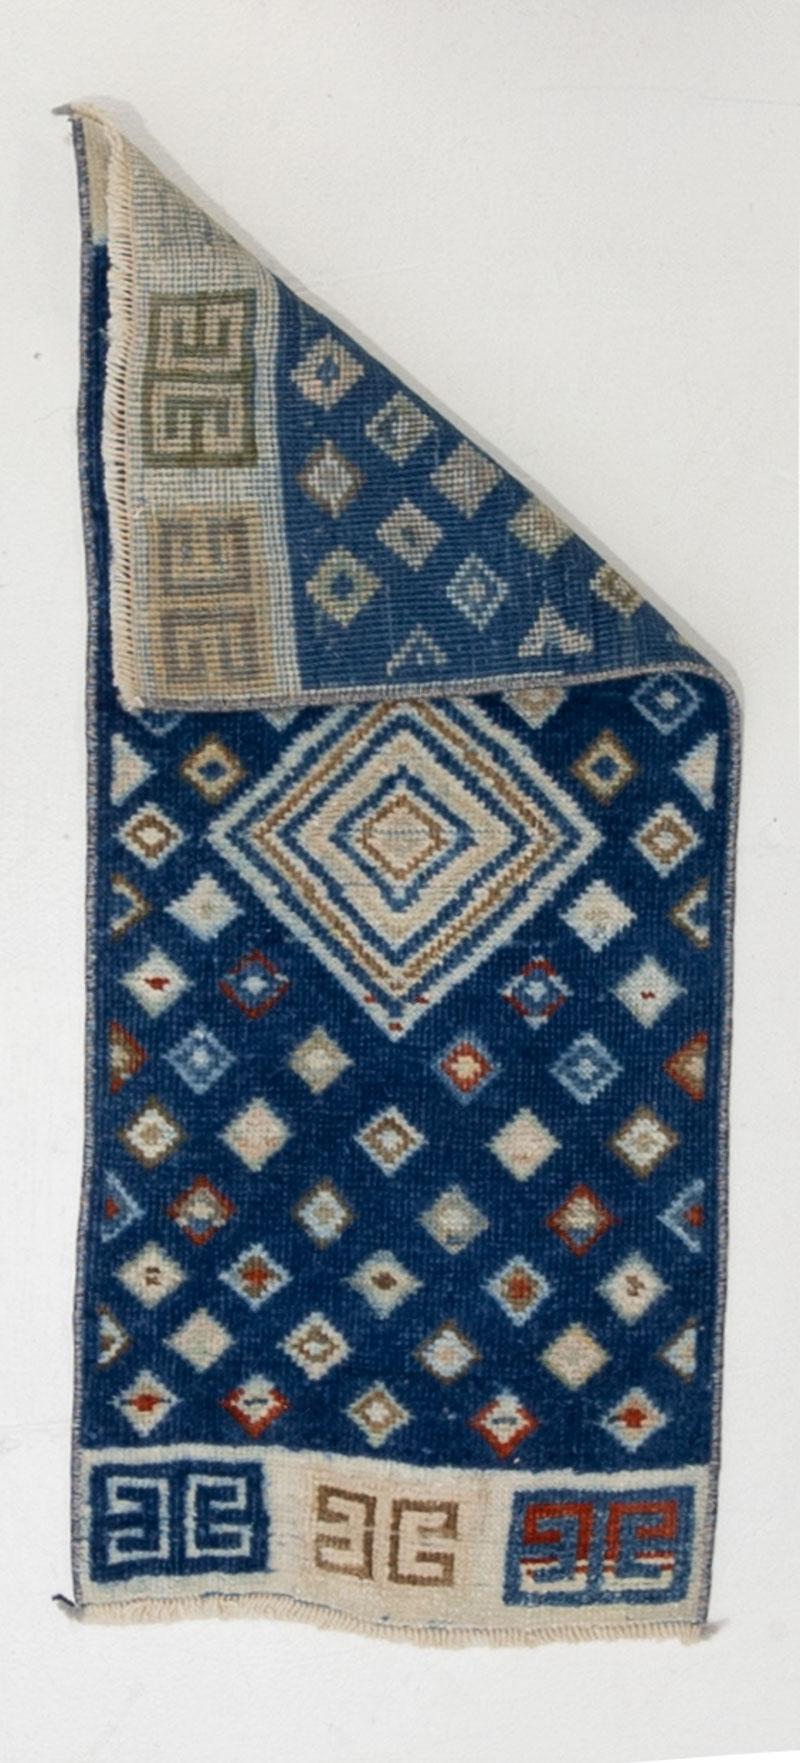 Age: Circa 1950

Colors: blue, tan, cream

Pile: low-medium 

Wear Notes: 0

Material: Wool on cotton. 

Beautifully saturated midcentury Anatolian yastik. 

Vintage rugs are made by hand over the course of months, sometimes years. Their